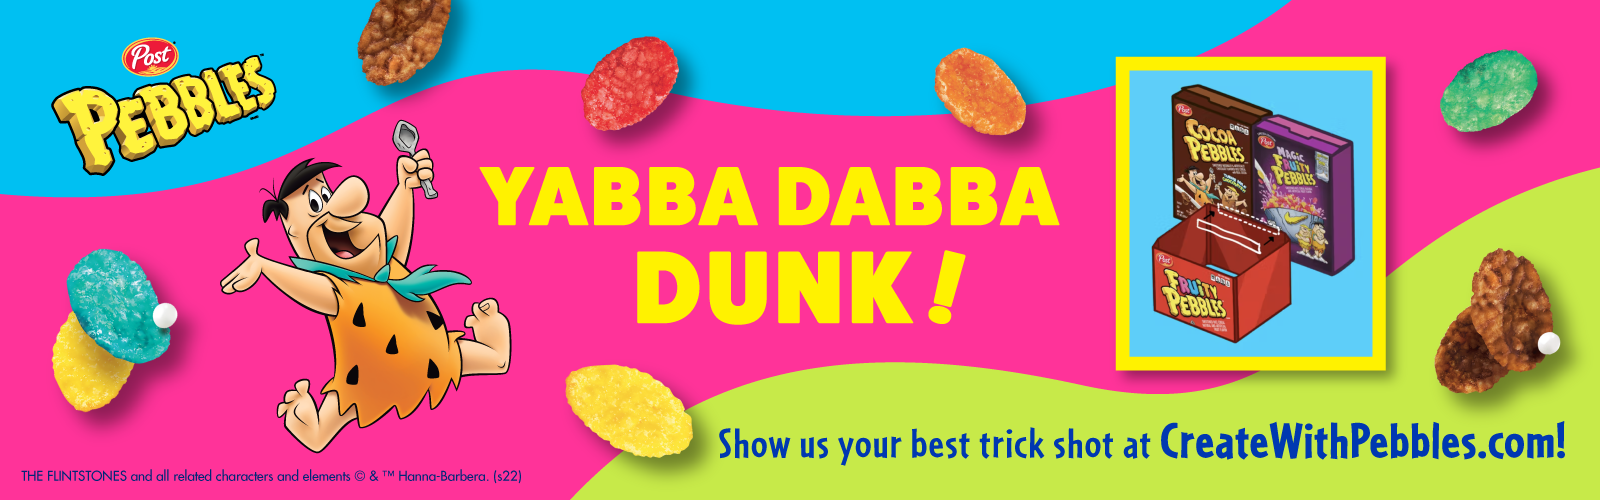 PEBBLES Yabba Dabba Dunk Contest for Kids